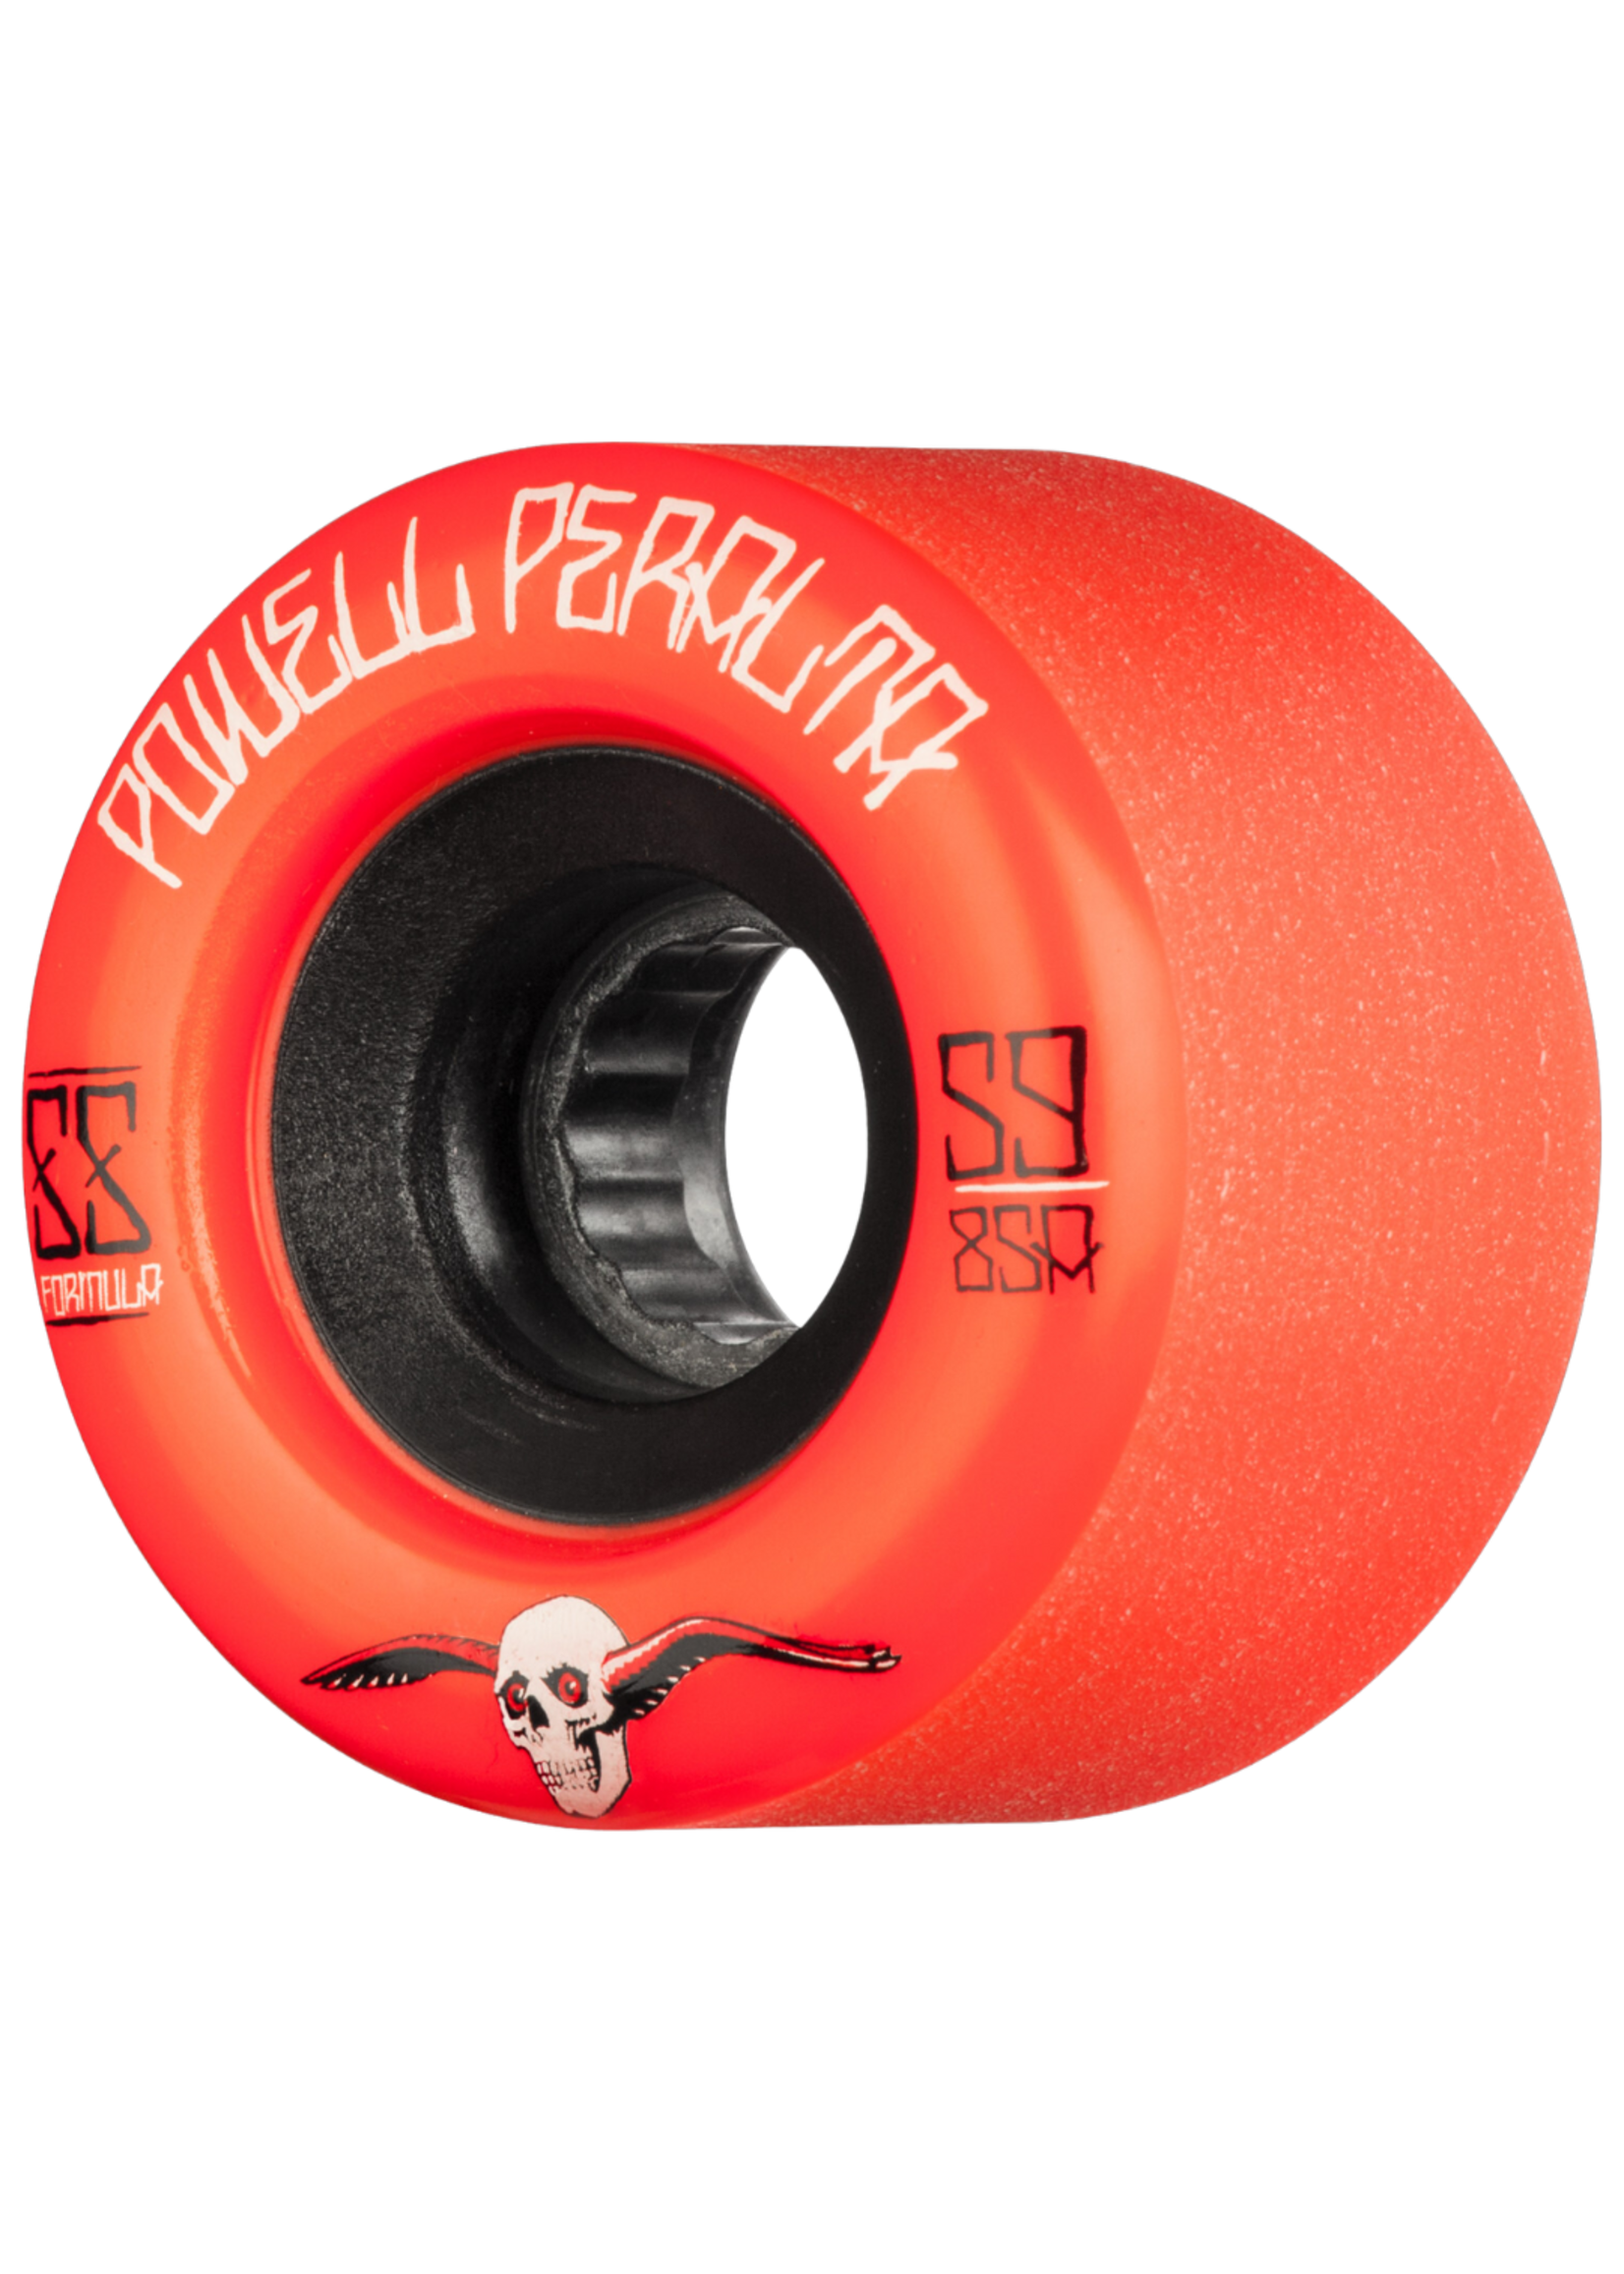 POWELL PERALTA G-SLIDES RED 59MM / 85A WHEELS